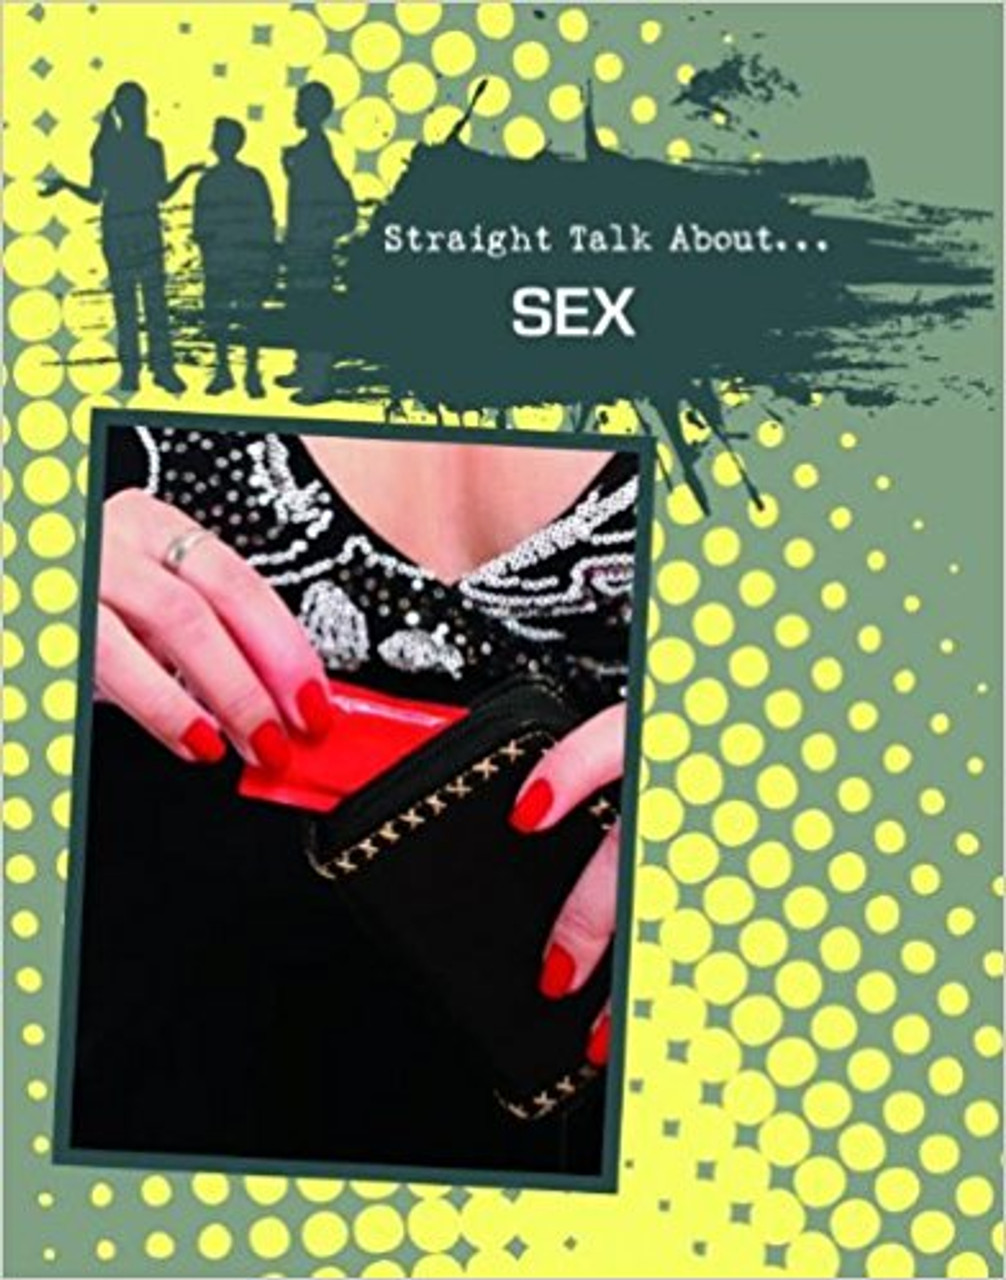 Sex (Paperback) by James Bow